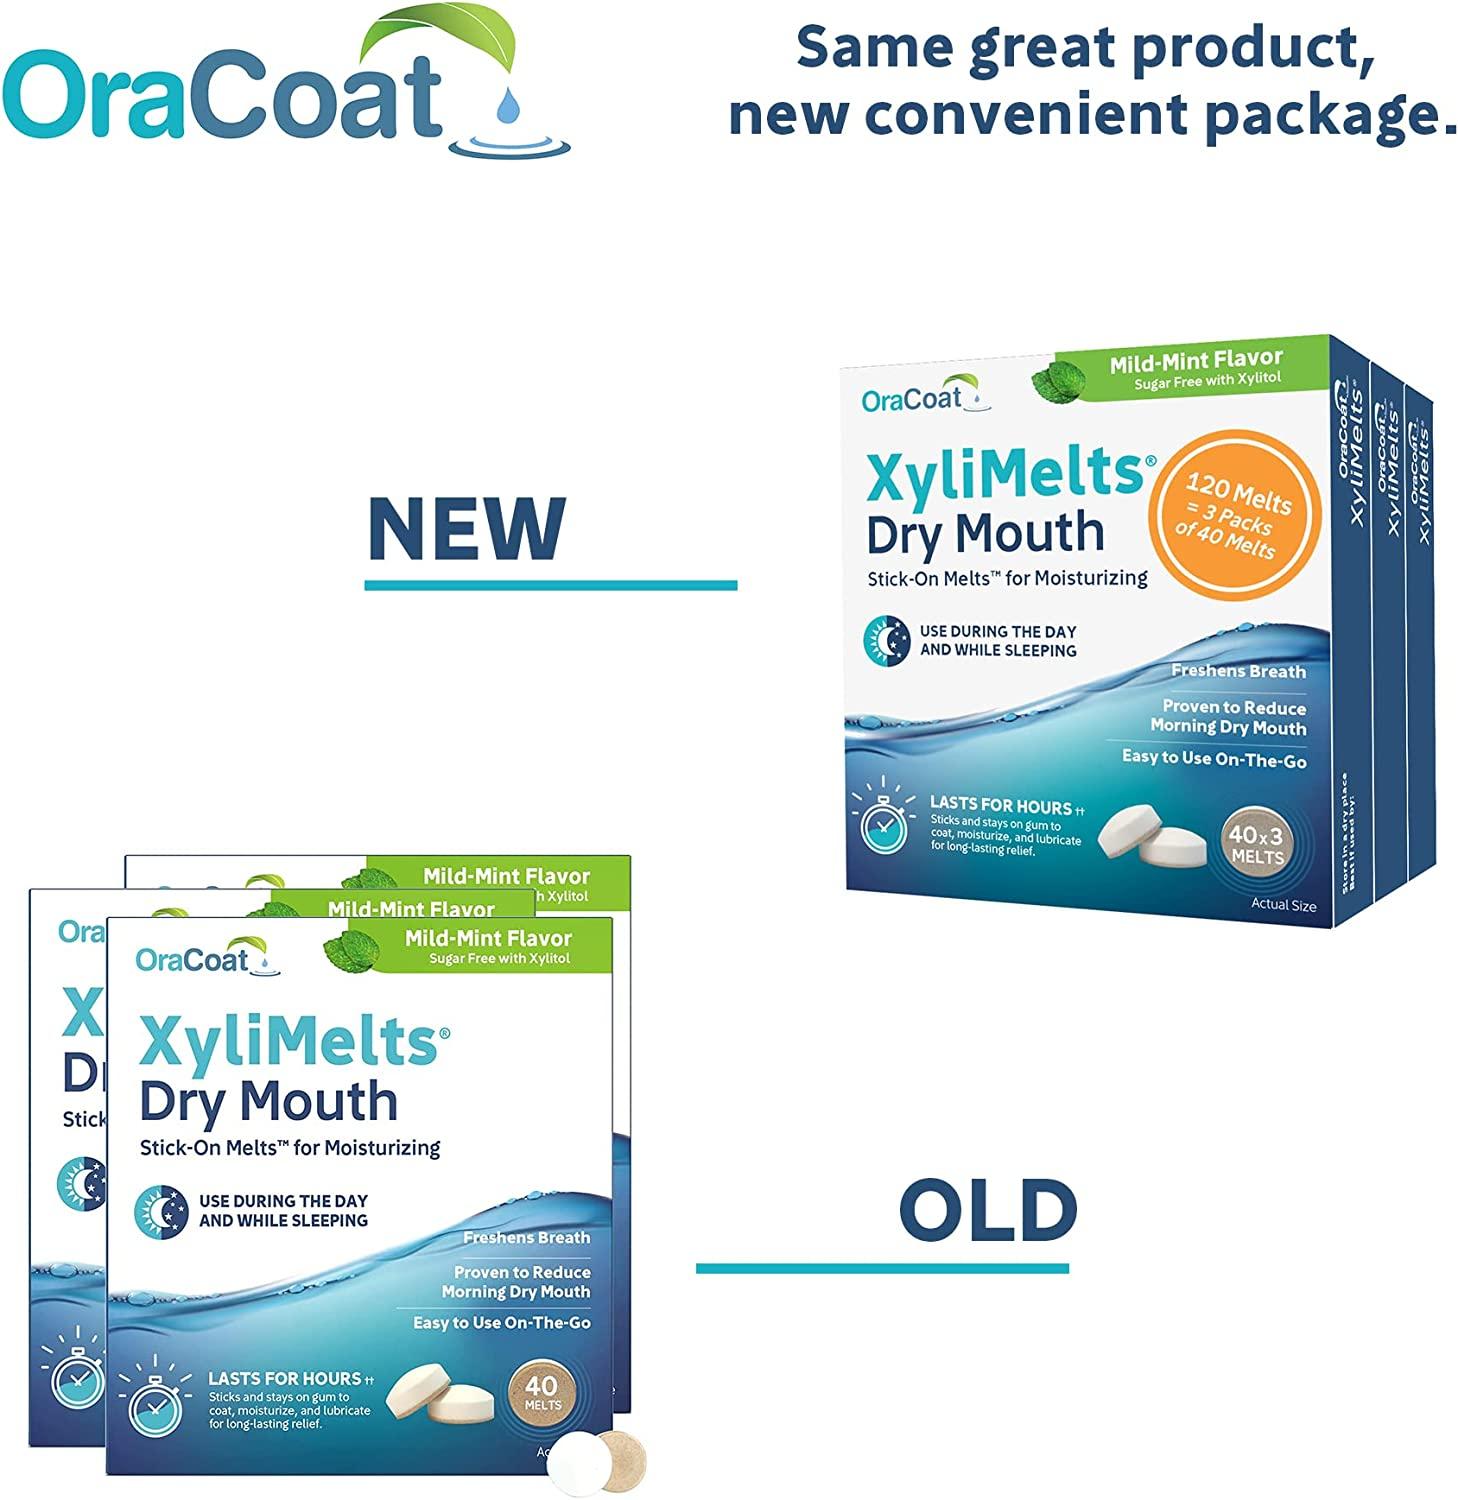 OraCoat Xylimelts For Dry Mouth - Mild-Mint